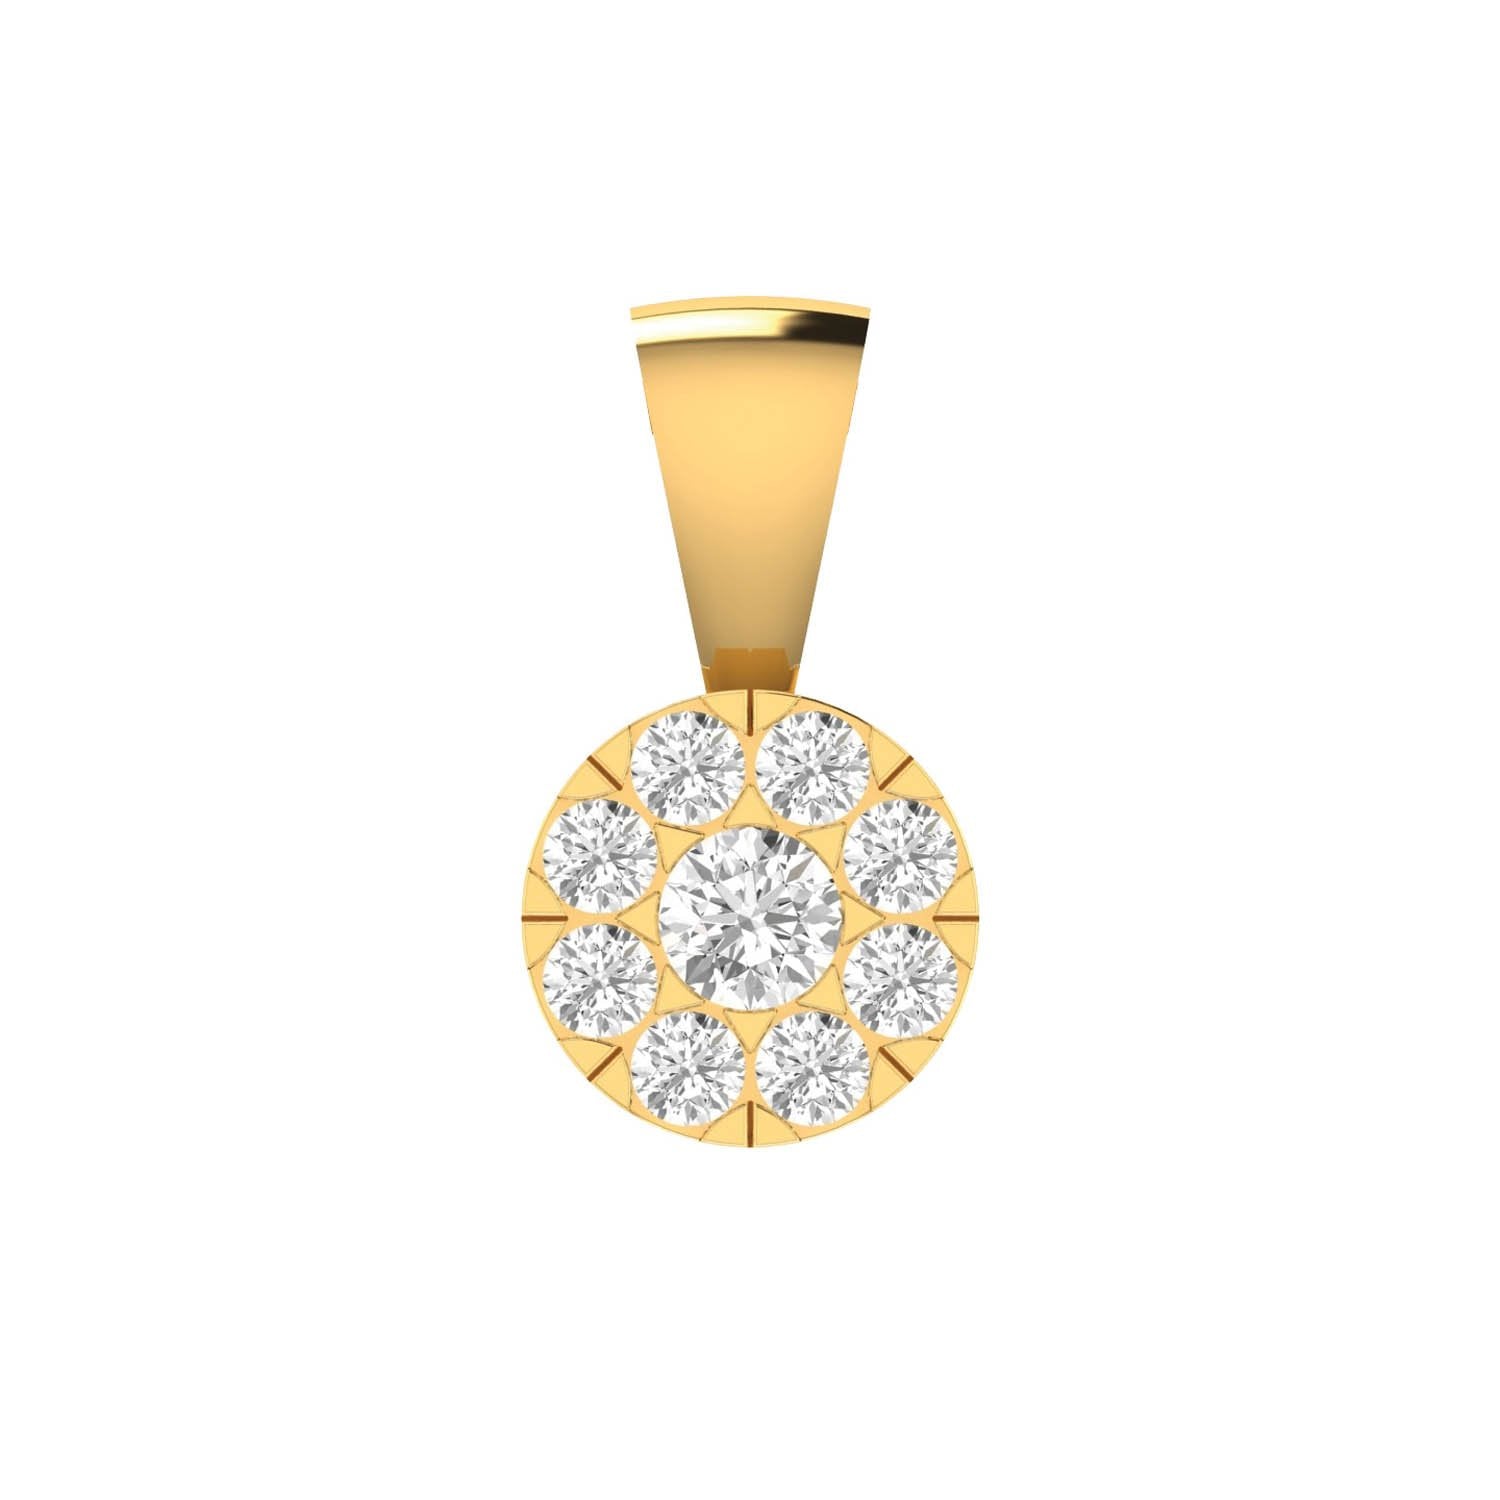 Cluster Diamond Pendant with 0.25ct Diamonds in 9K Yellow Gold - 9YPCLUS25GH